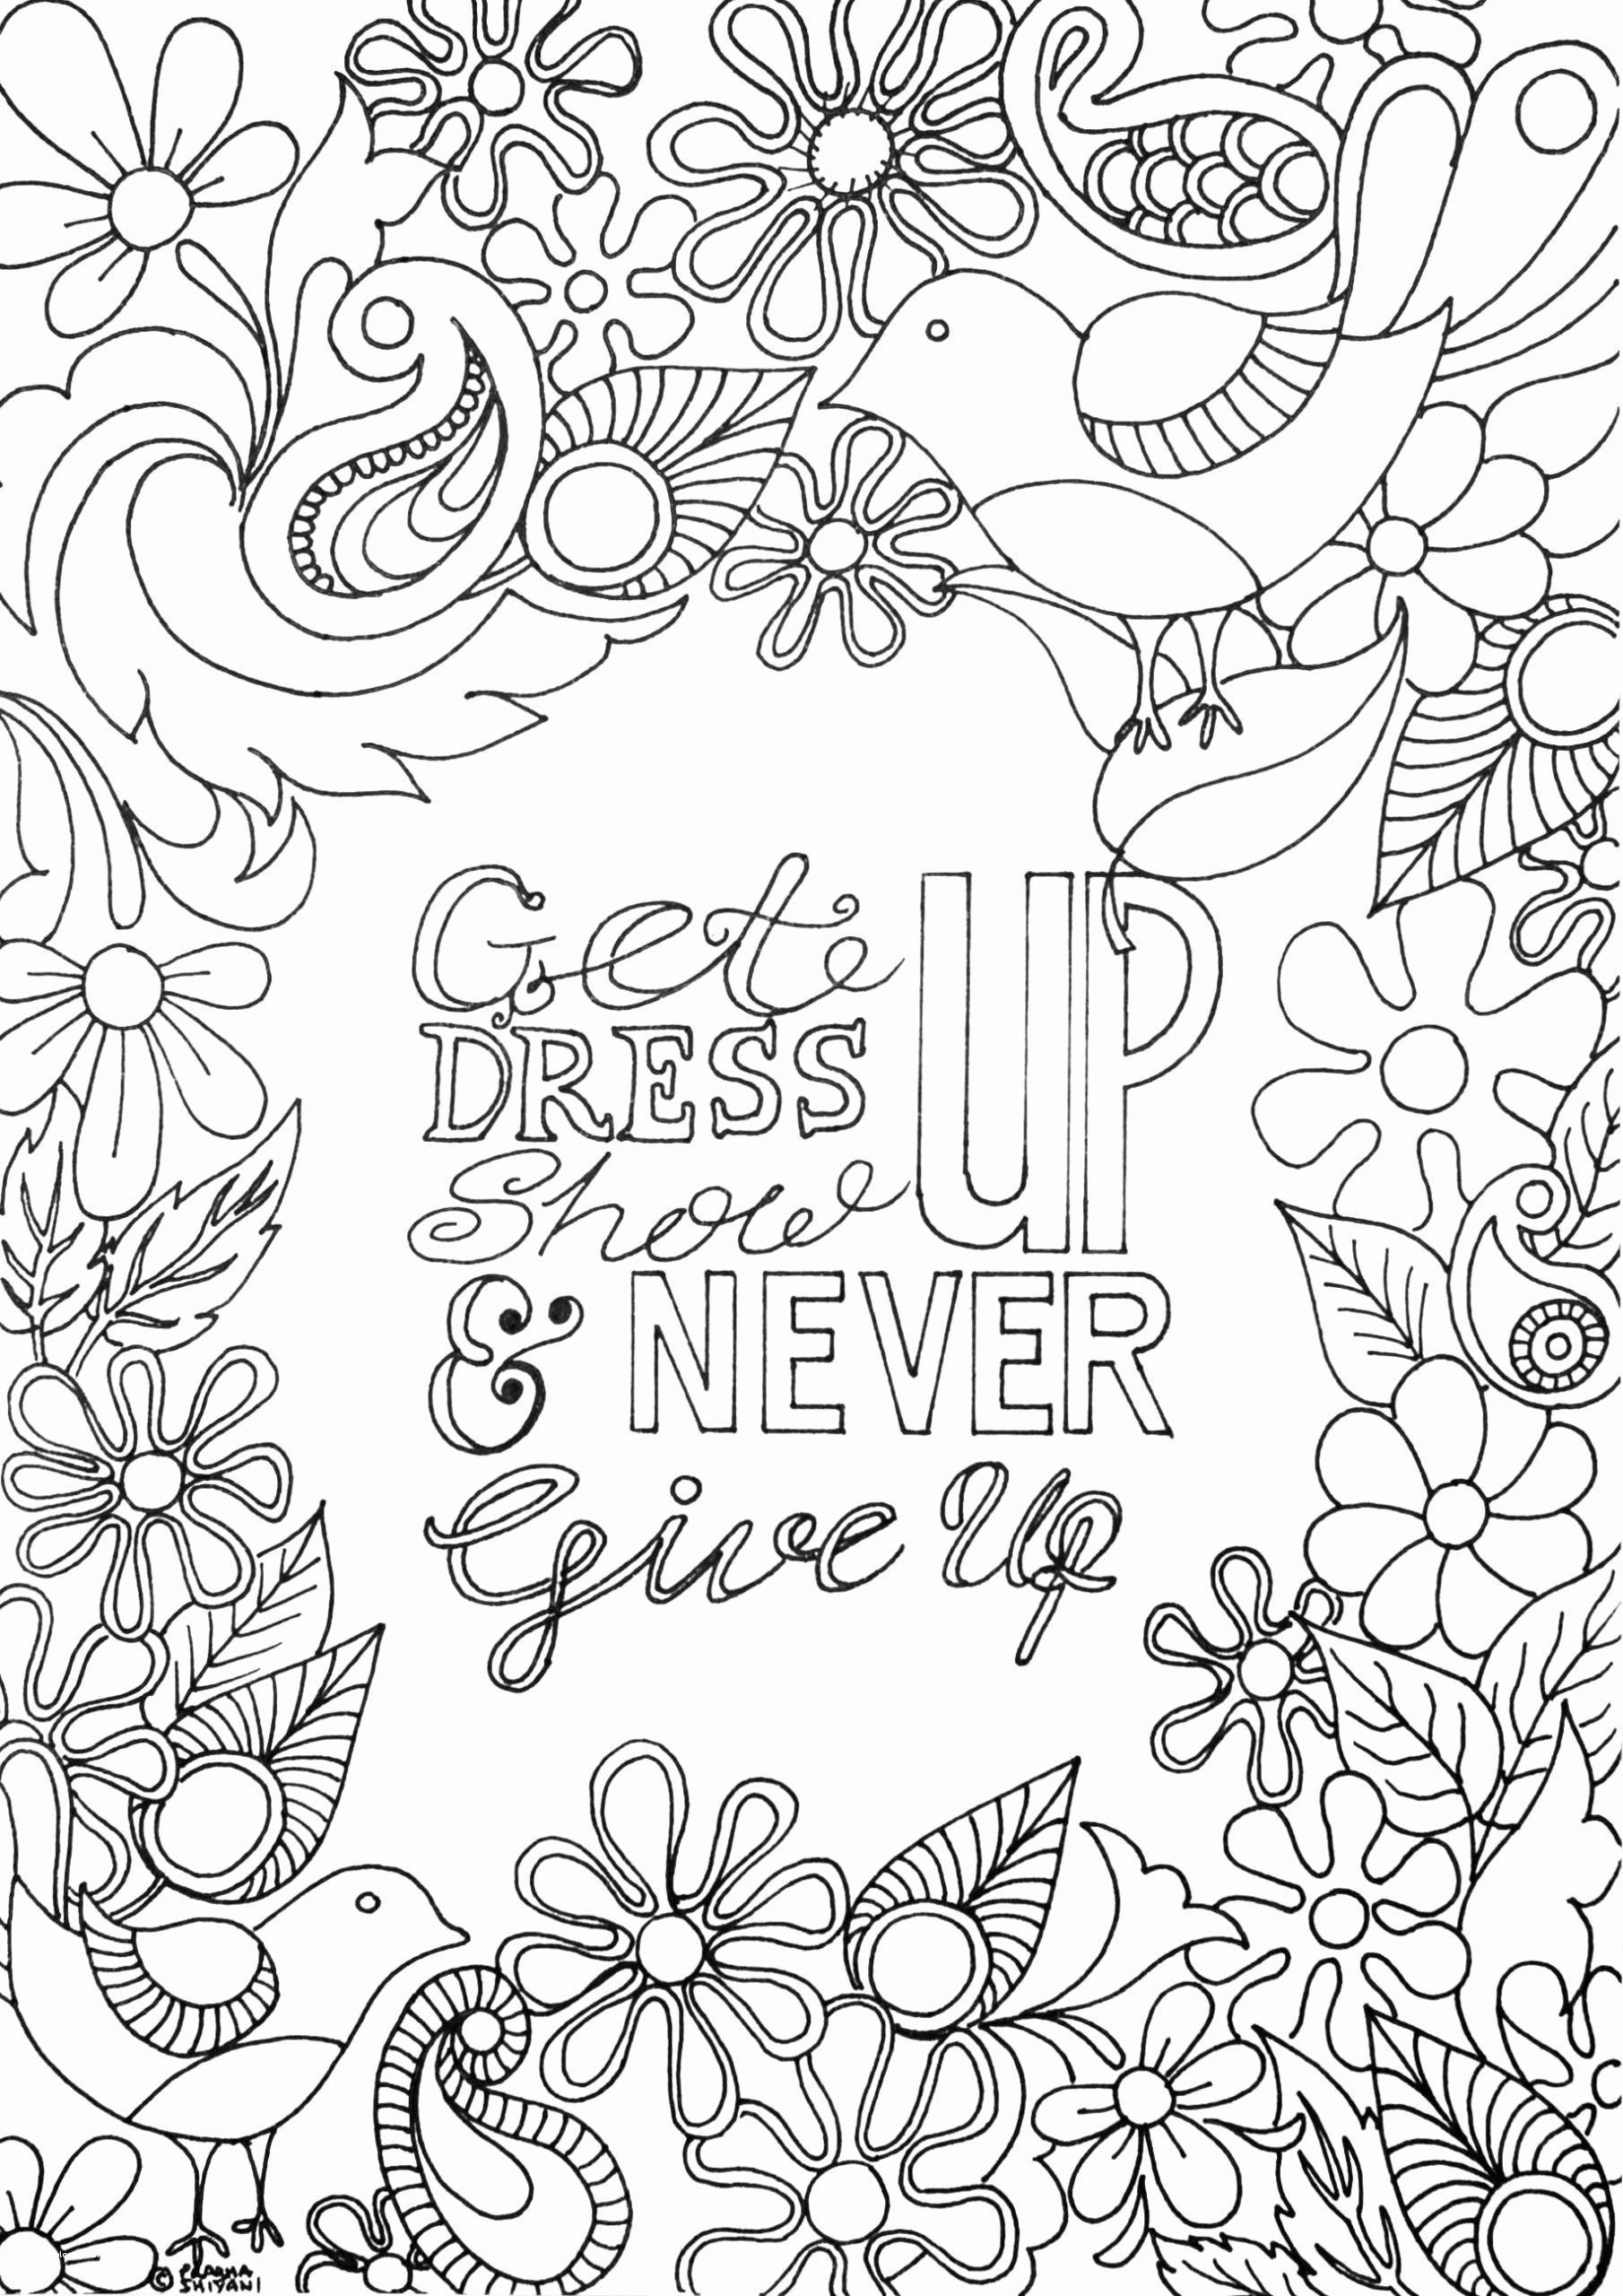 Printable affirmations for self esteem tags printable affirmation coloring page colouring picture lol â printable coloring pages coloring books coloring pages